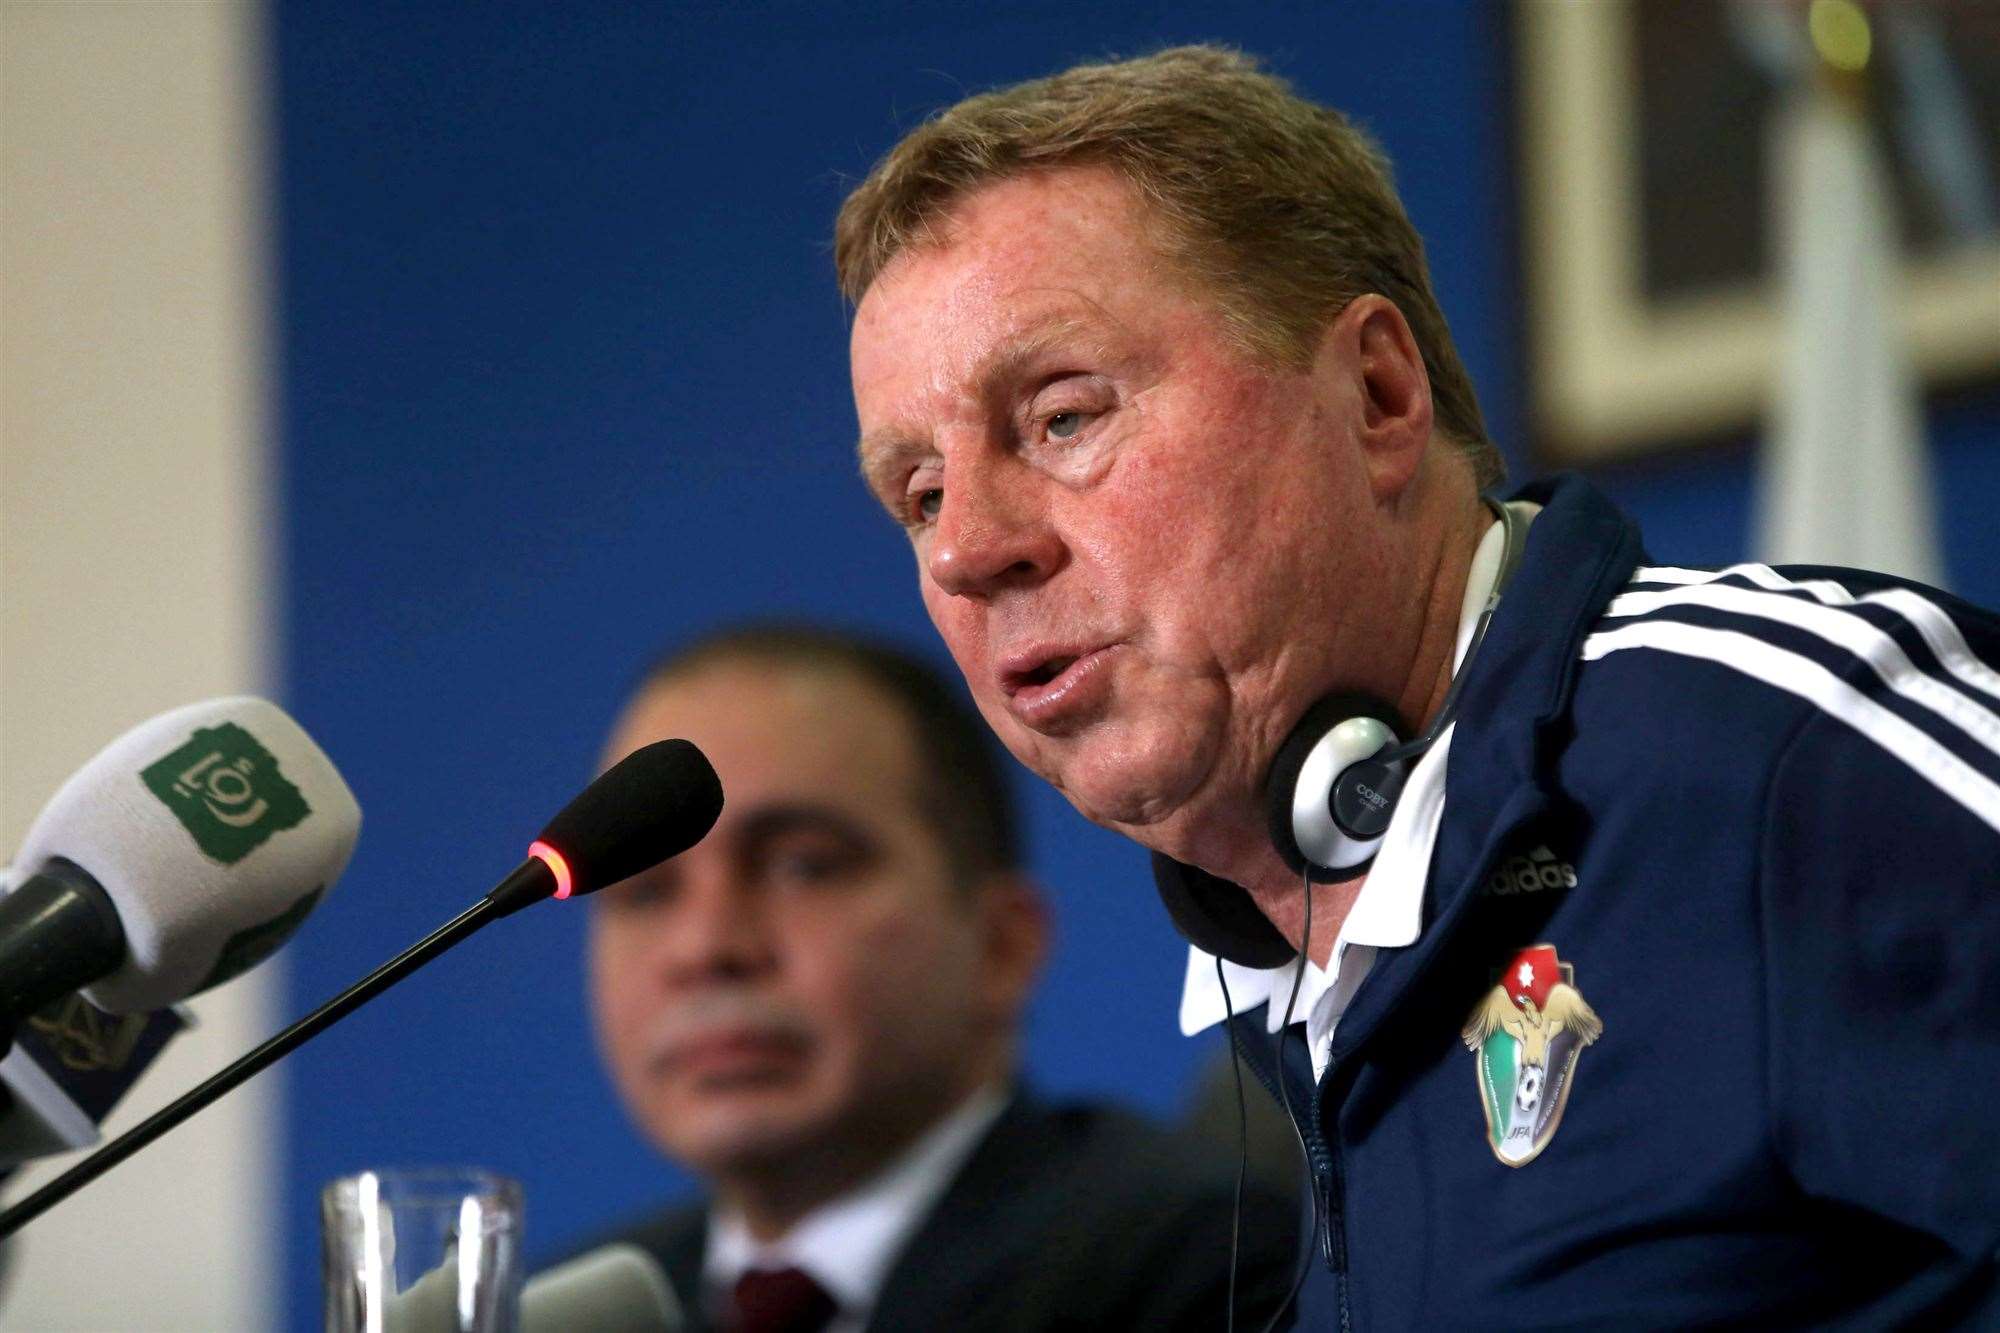 Jordan's latest manager Harry Redknapp. (Photo by Getty Images)